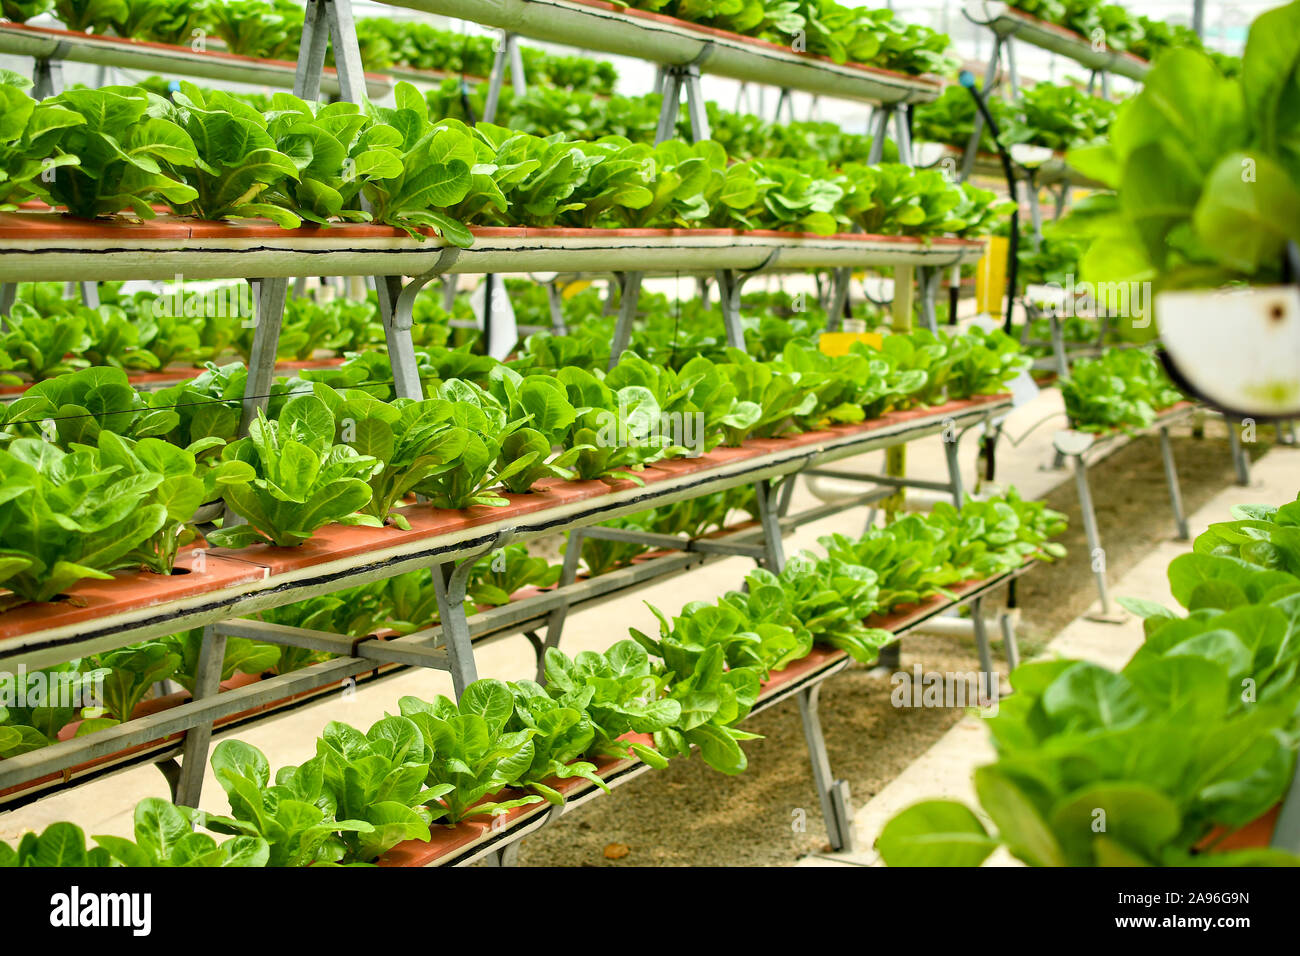 Rows of vegetables in organic vertical farming Stock Photo